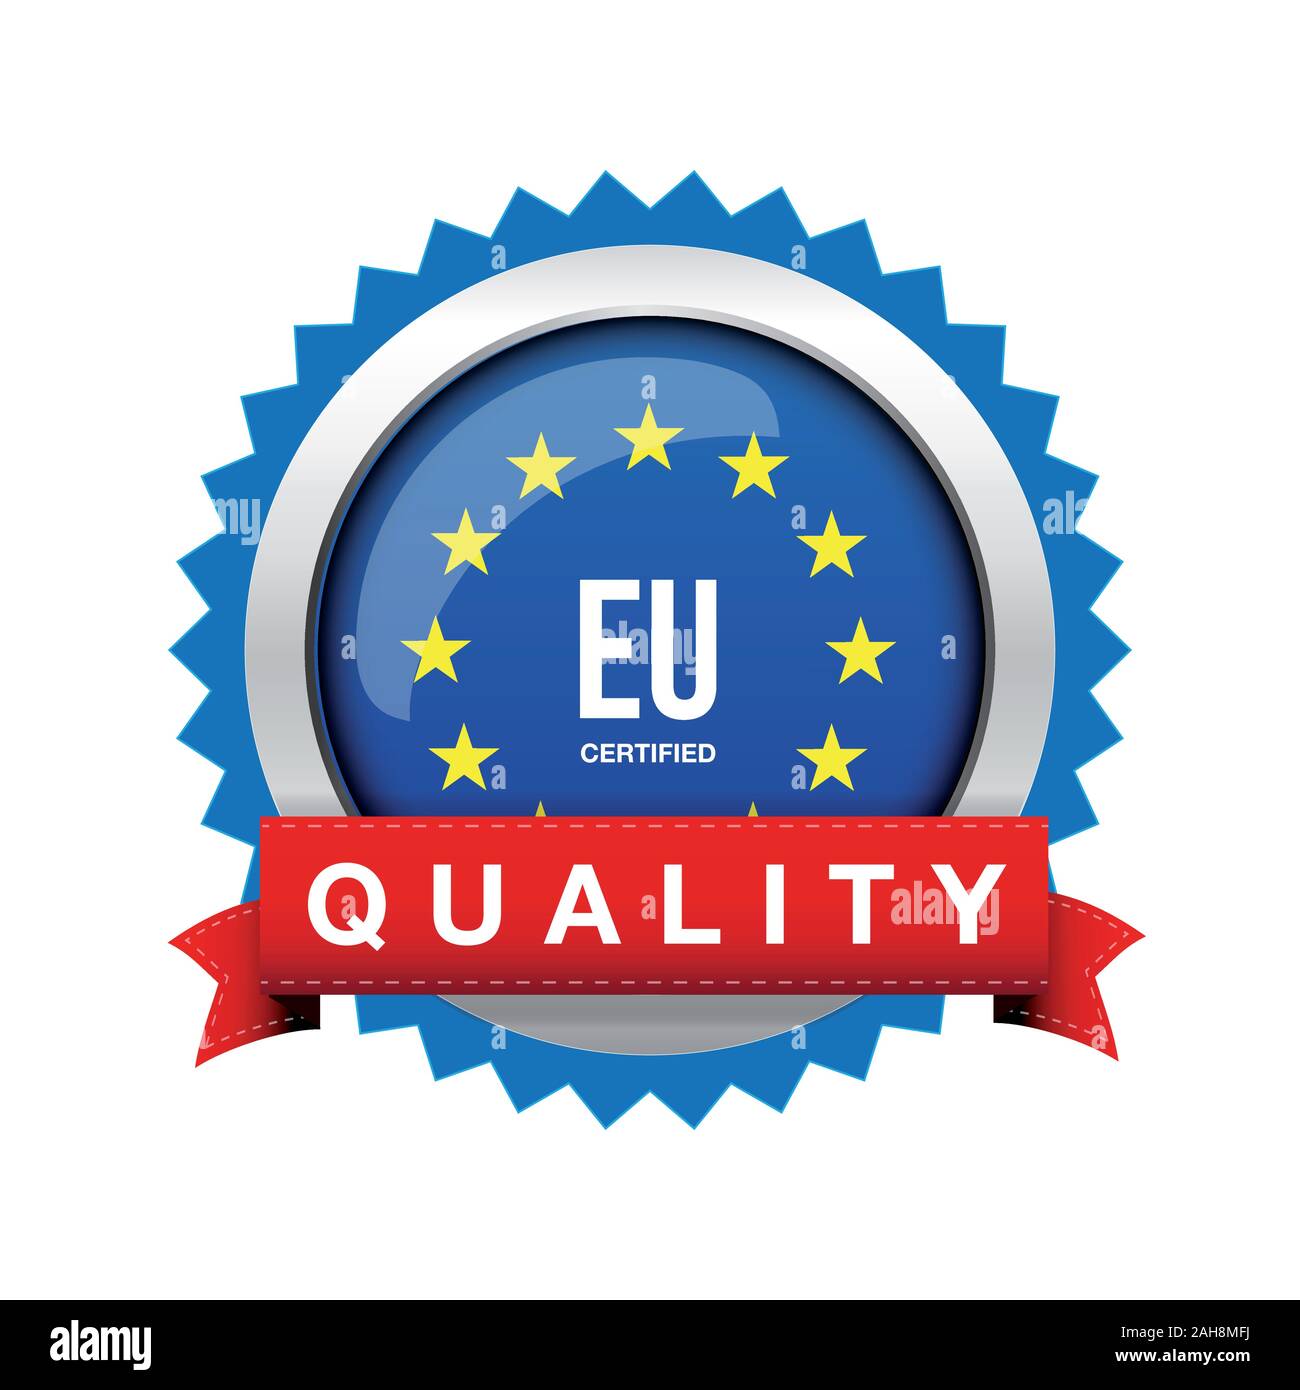 EU - Europe Certified Quality badge sign Stock Vector